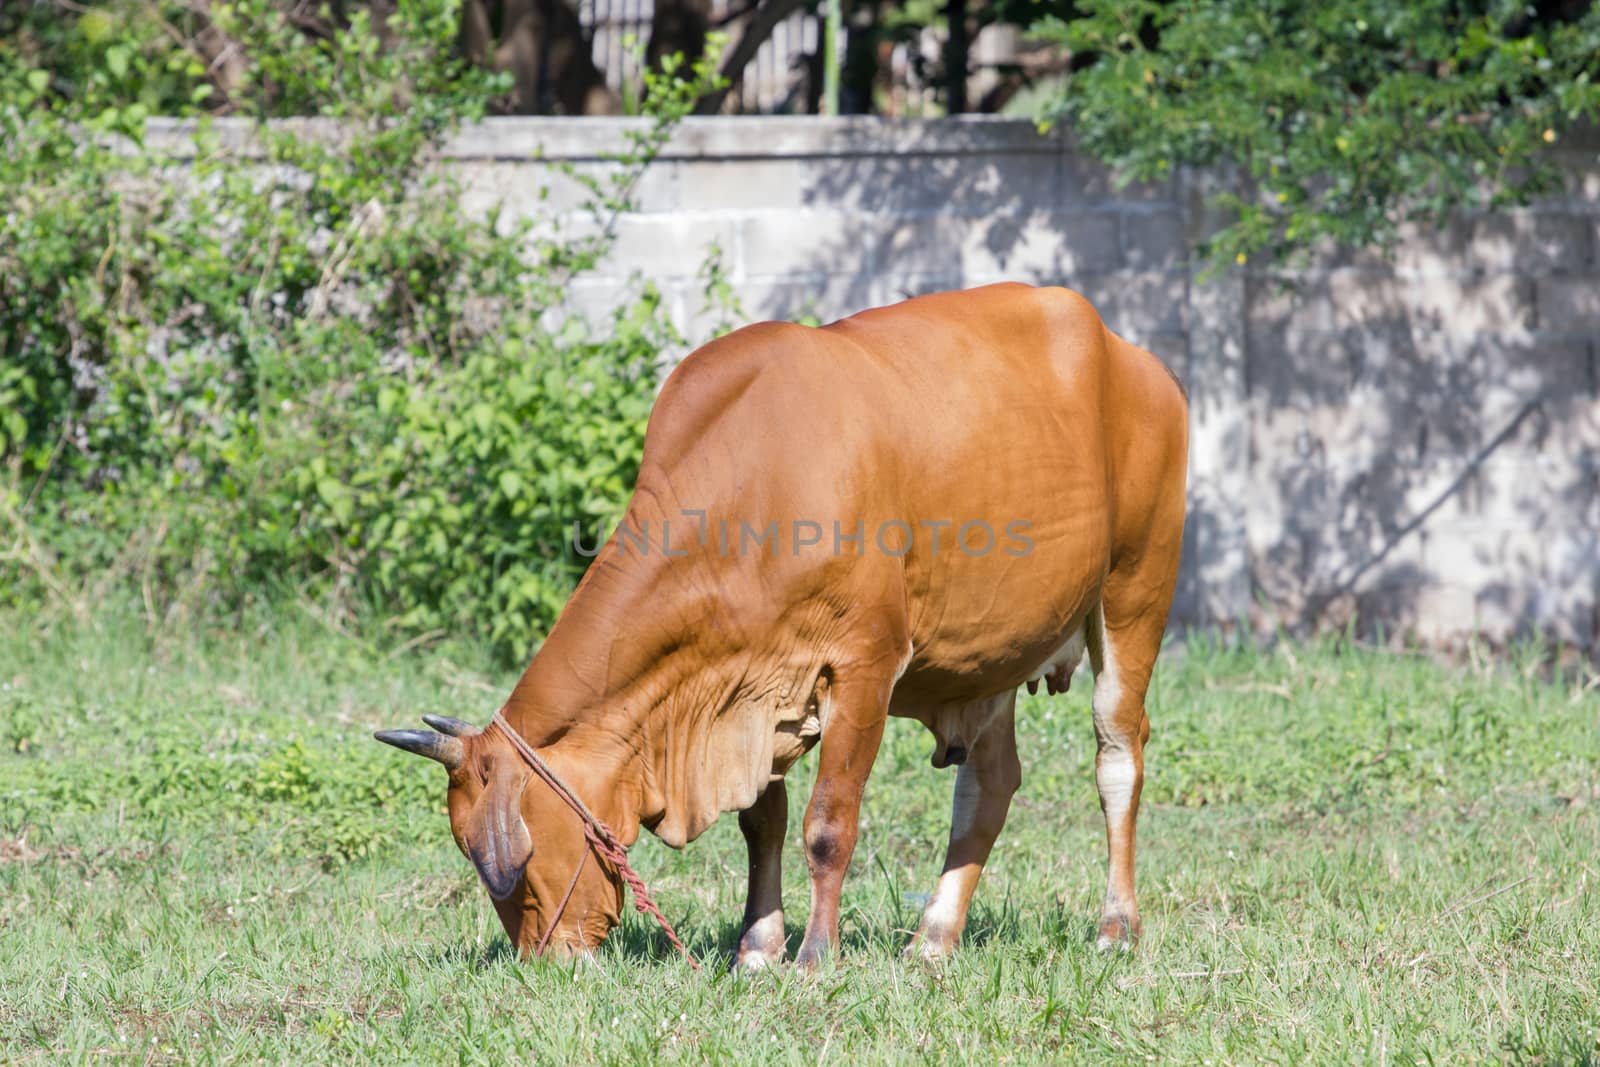 brown cow eating grass in a field in Thailand by a3701027